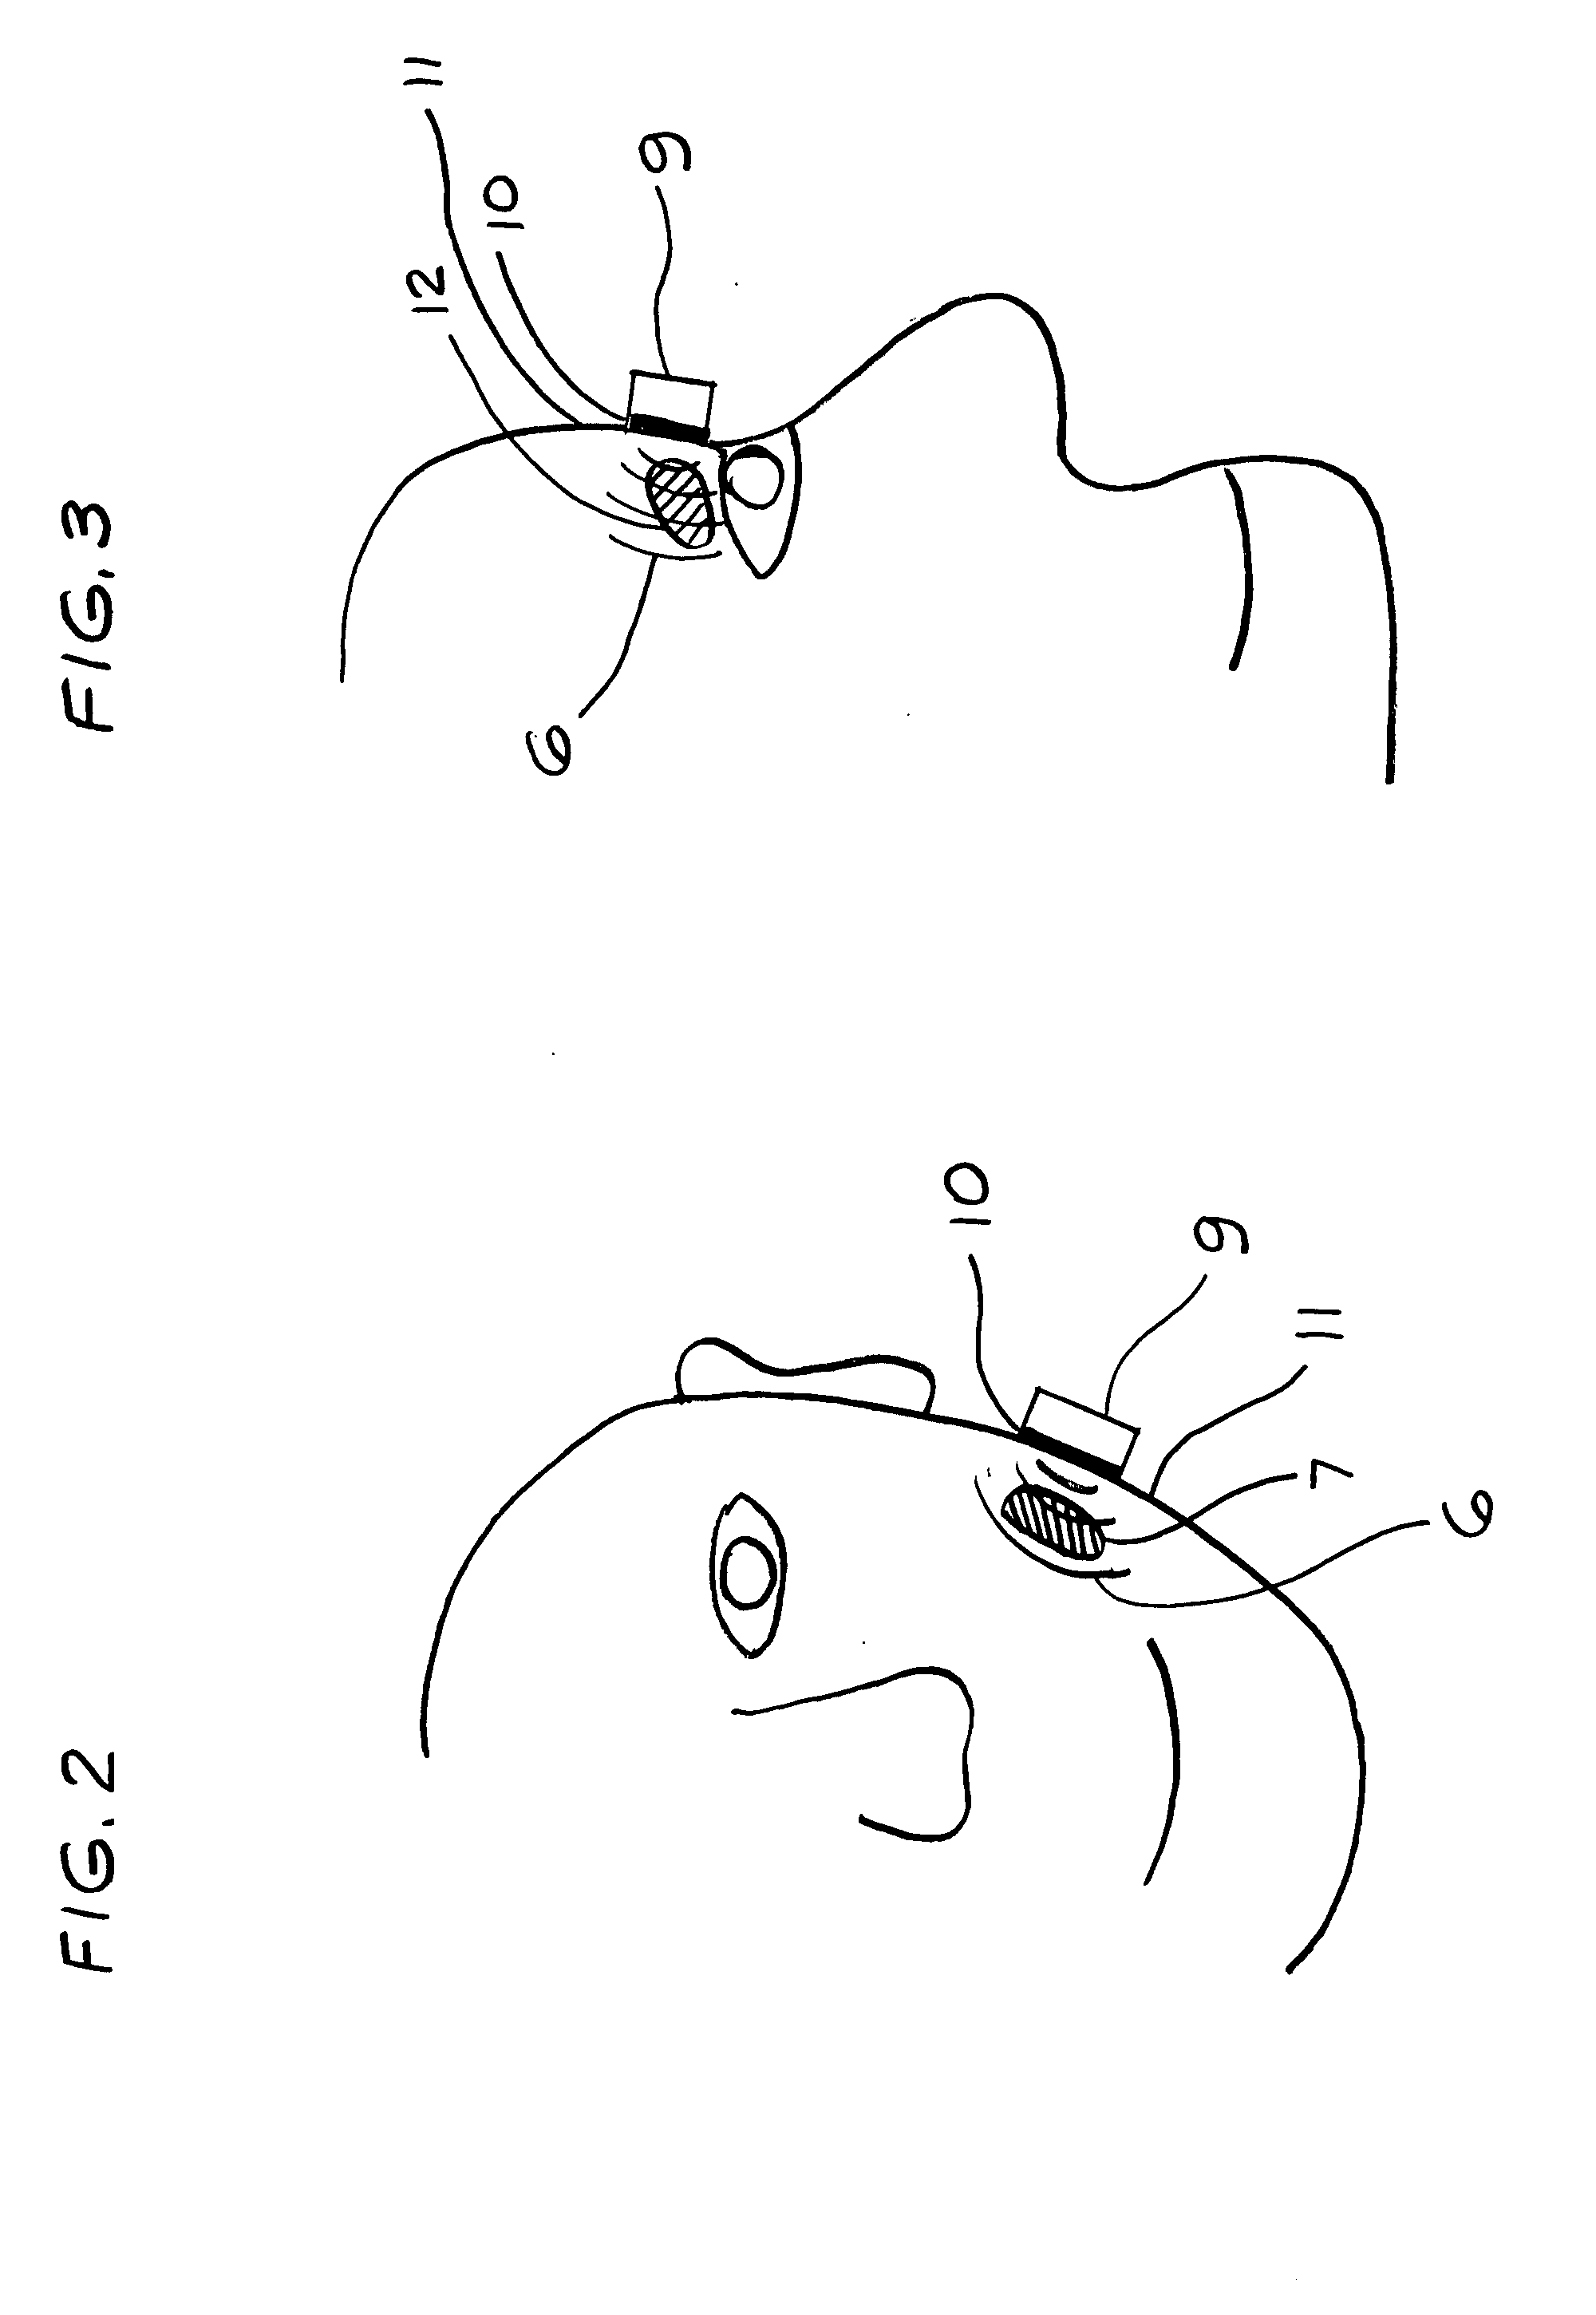 Method for increasing saliva and tear production with ultrasound